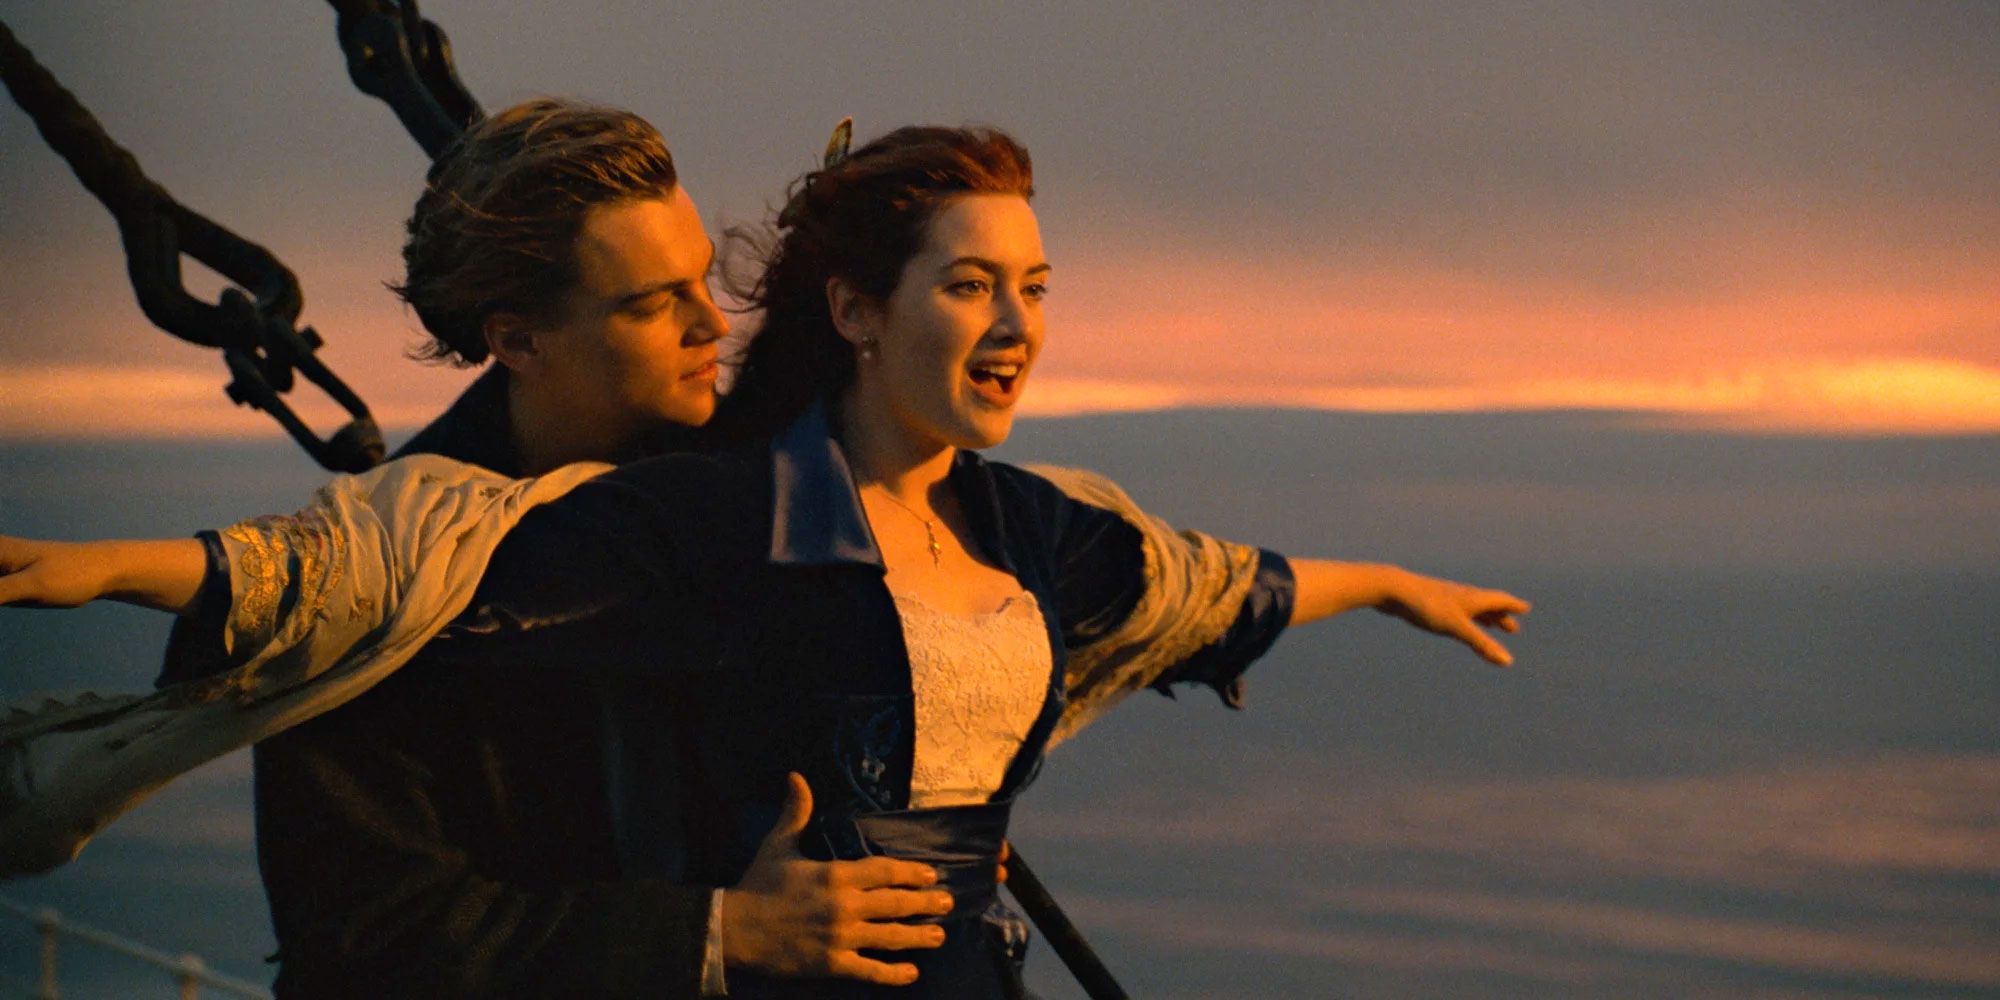 Jack and Rose are the king of the world on the Titanic.